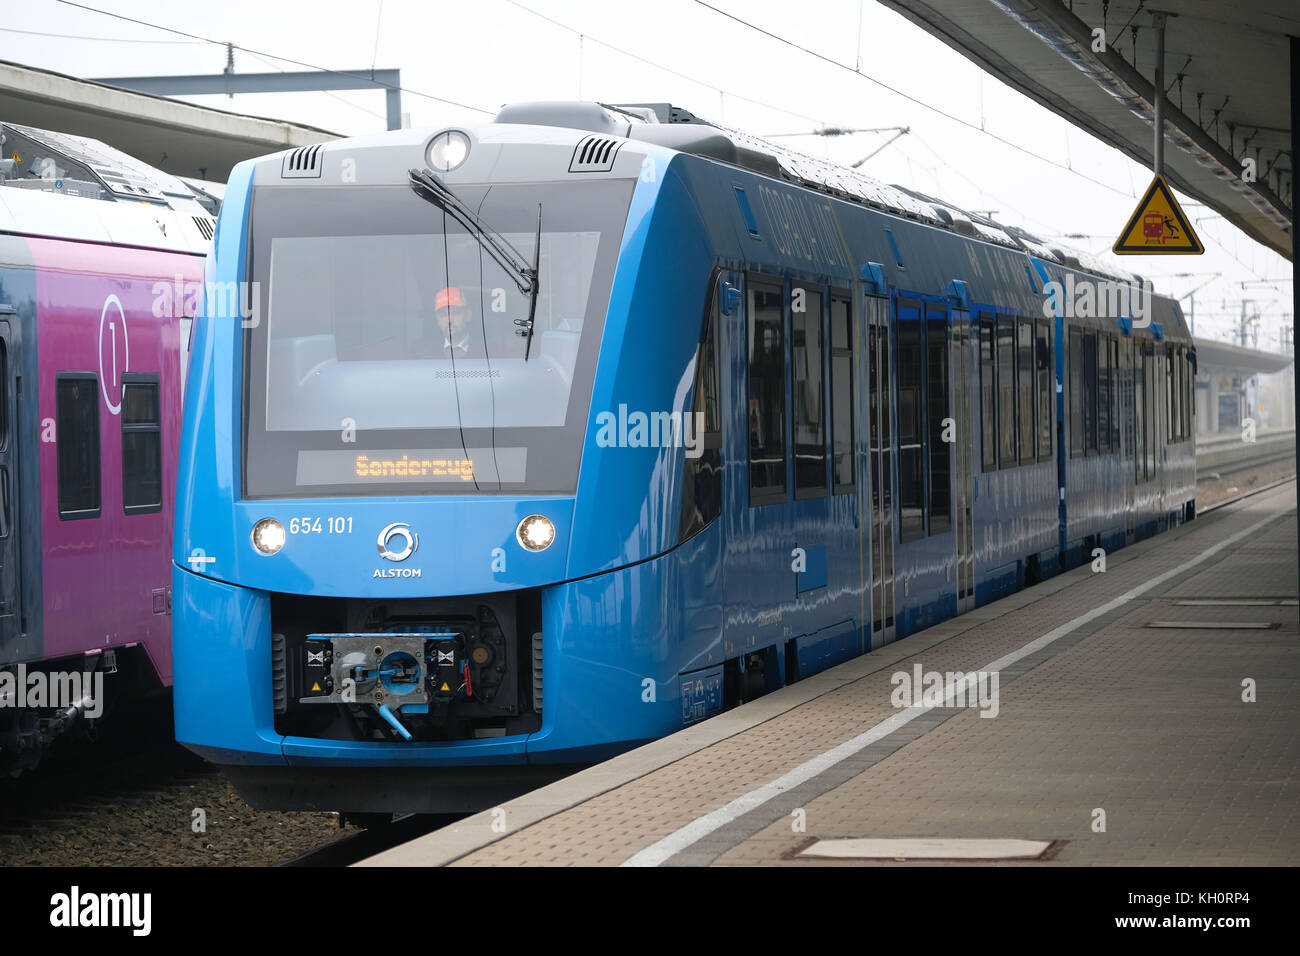 Wolfsburg, Germany. 9th Nov, 2017. A new train powered by fuel cells which convert hydrogen to electricty, arrives at the train station in Wolfsburg, Germany, 9 November 2017. The train is planned to service railway links in parts of Germany, among other places also in Lower Saxony. Sections of the train are decorated with chemical symboles. Credit: Peter Steffen/dpa/Alamy Live News Stock Photo